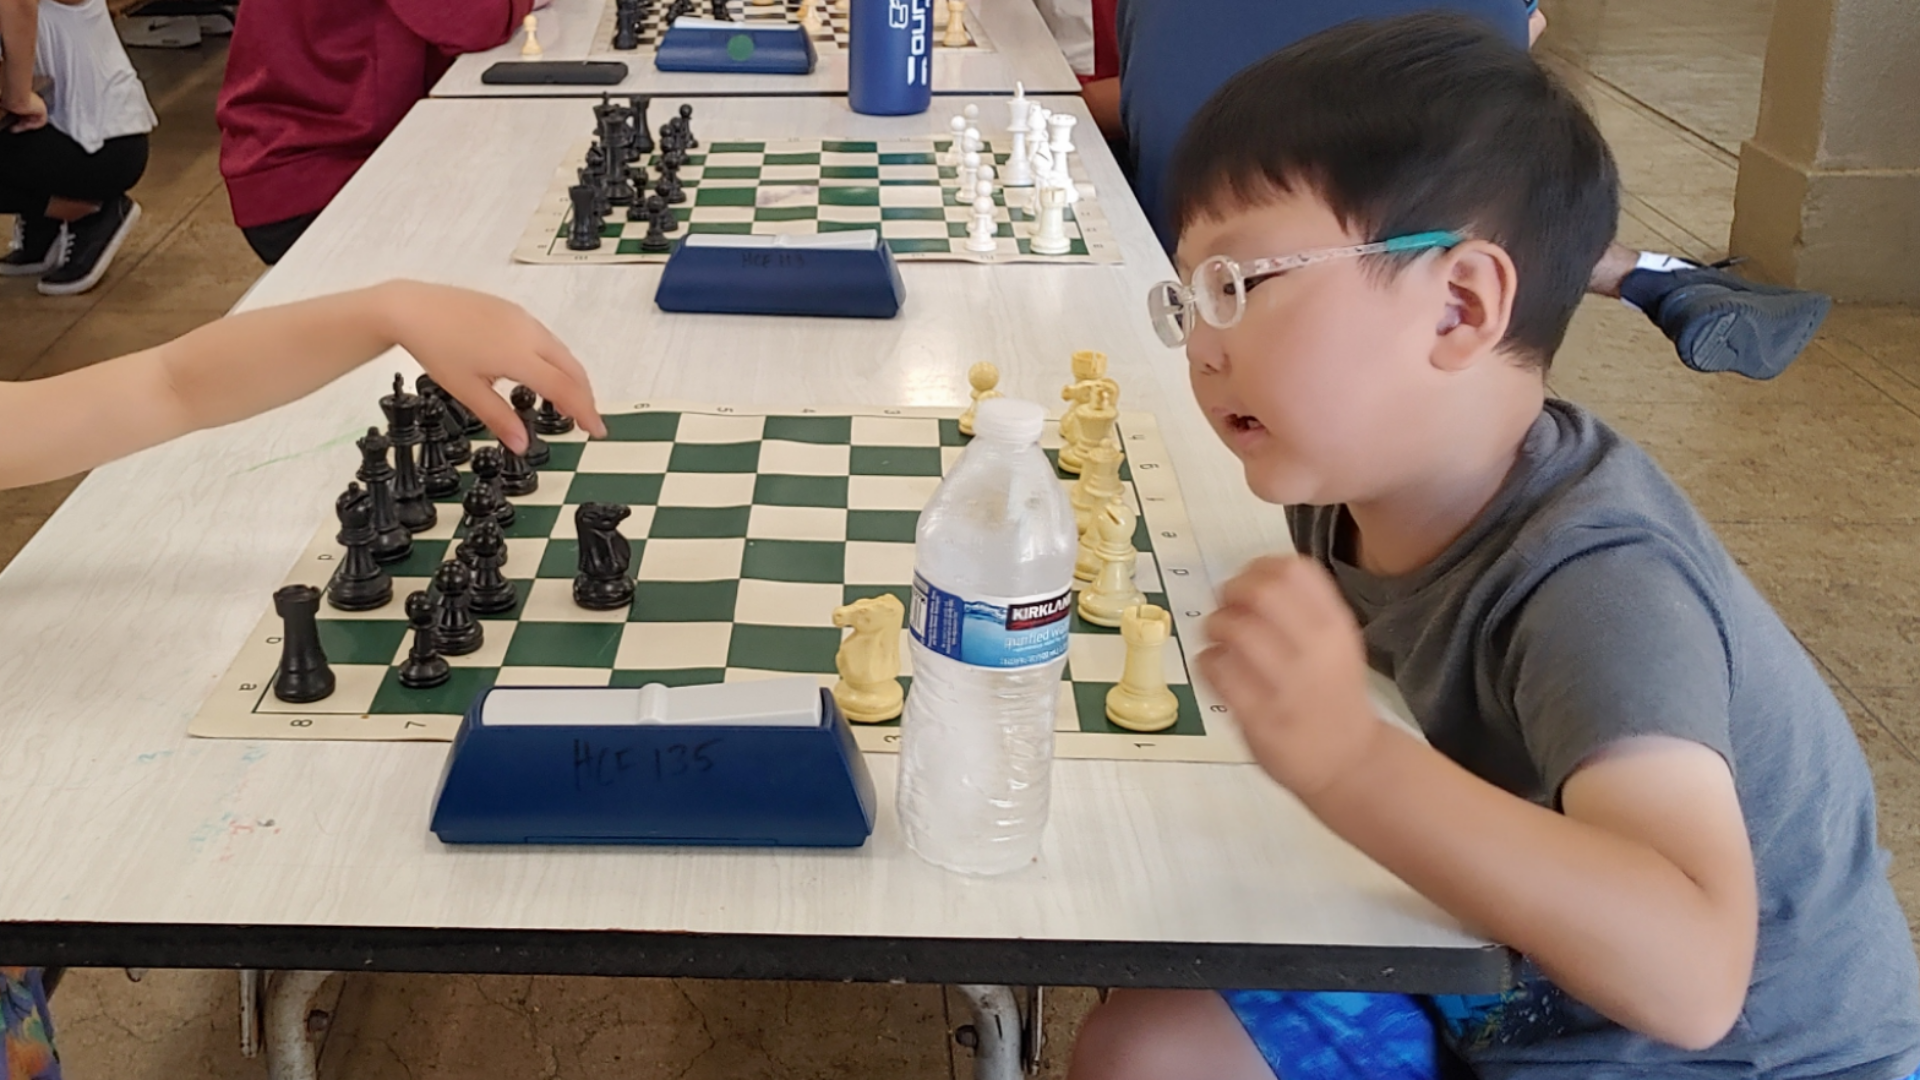 First Grader, Henry Cho takes 3rd place in Chess Tournament!